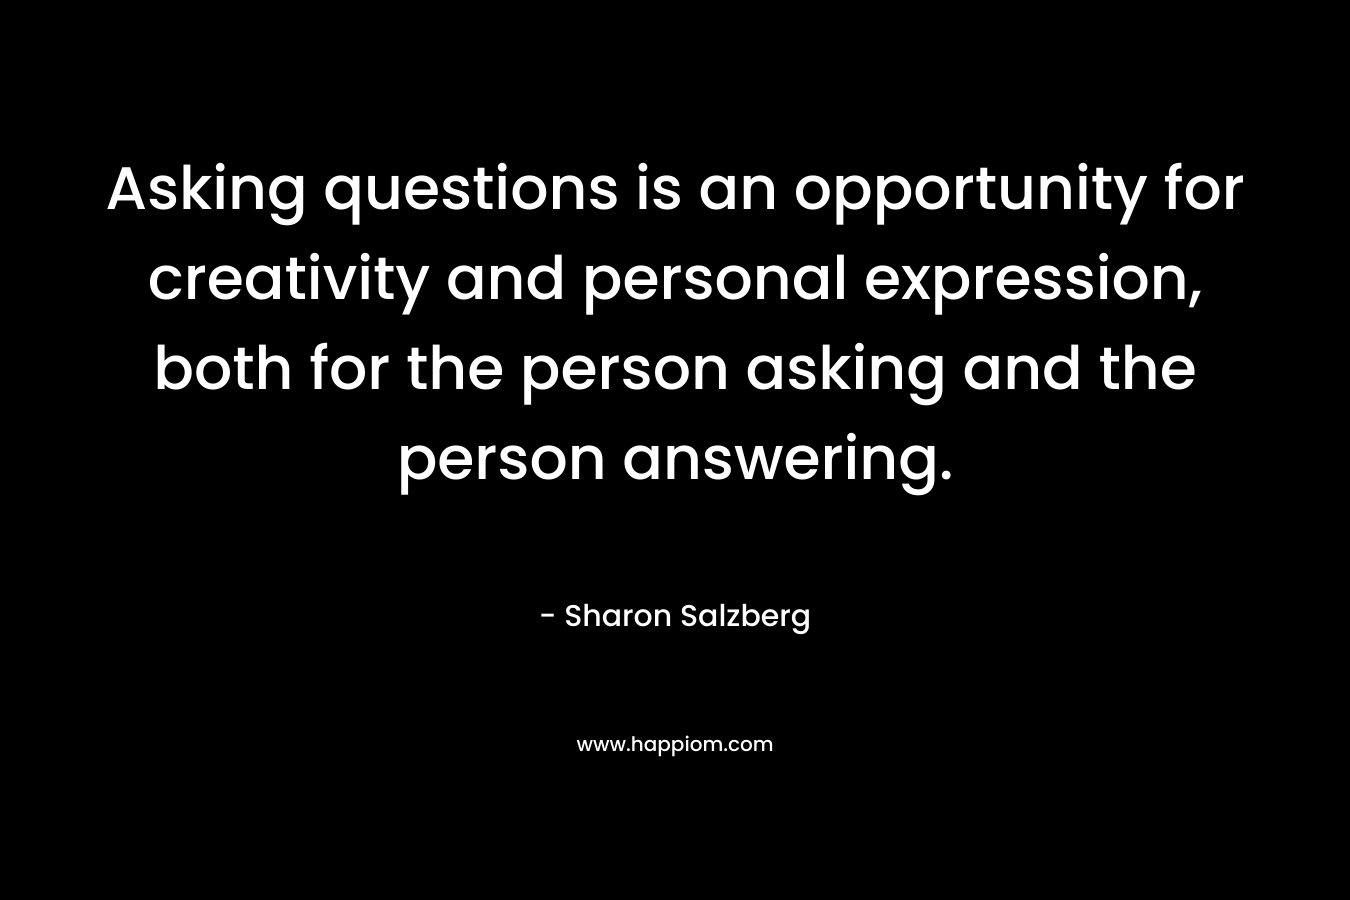 Asking questions is an opportunity for creativity and personal expression, both for the person asking and the person answering.